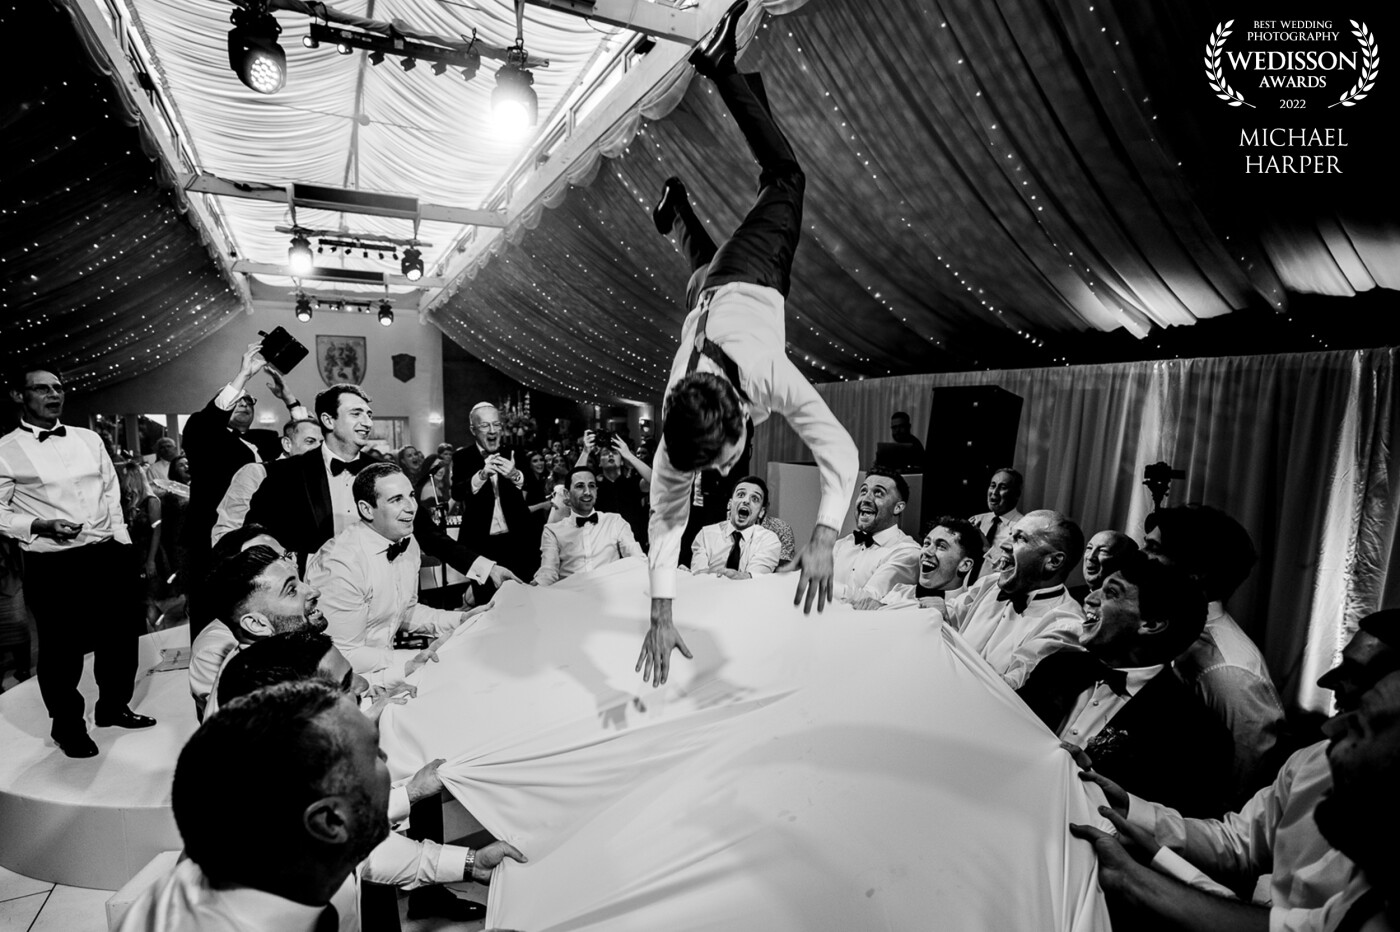 A wonderful Jewish wedding that was lucky enough to have tall ceilings! Moments like this happen fast but we were ready, shoulder to shoulder with the crowd and armed with a 16mm the moment of freefall was captured perfectly.